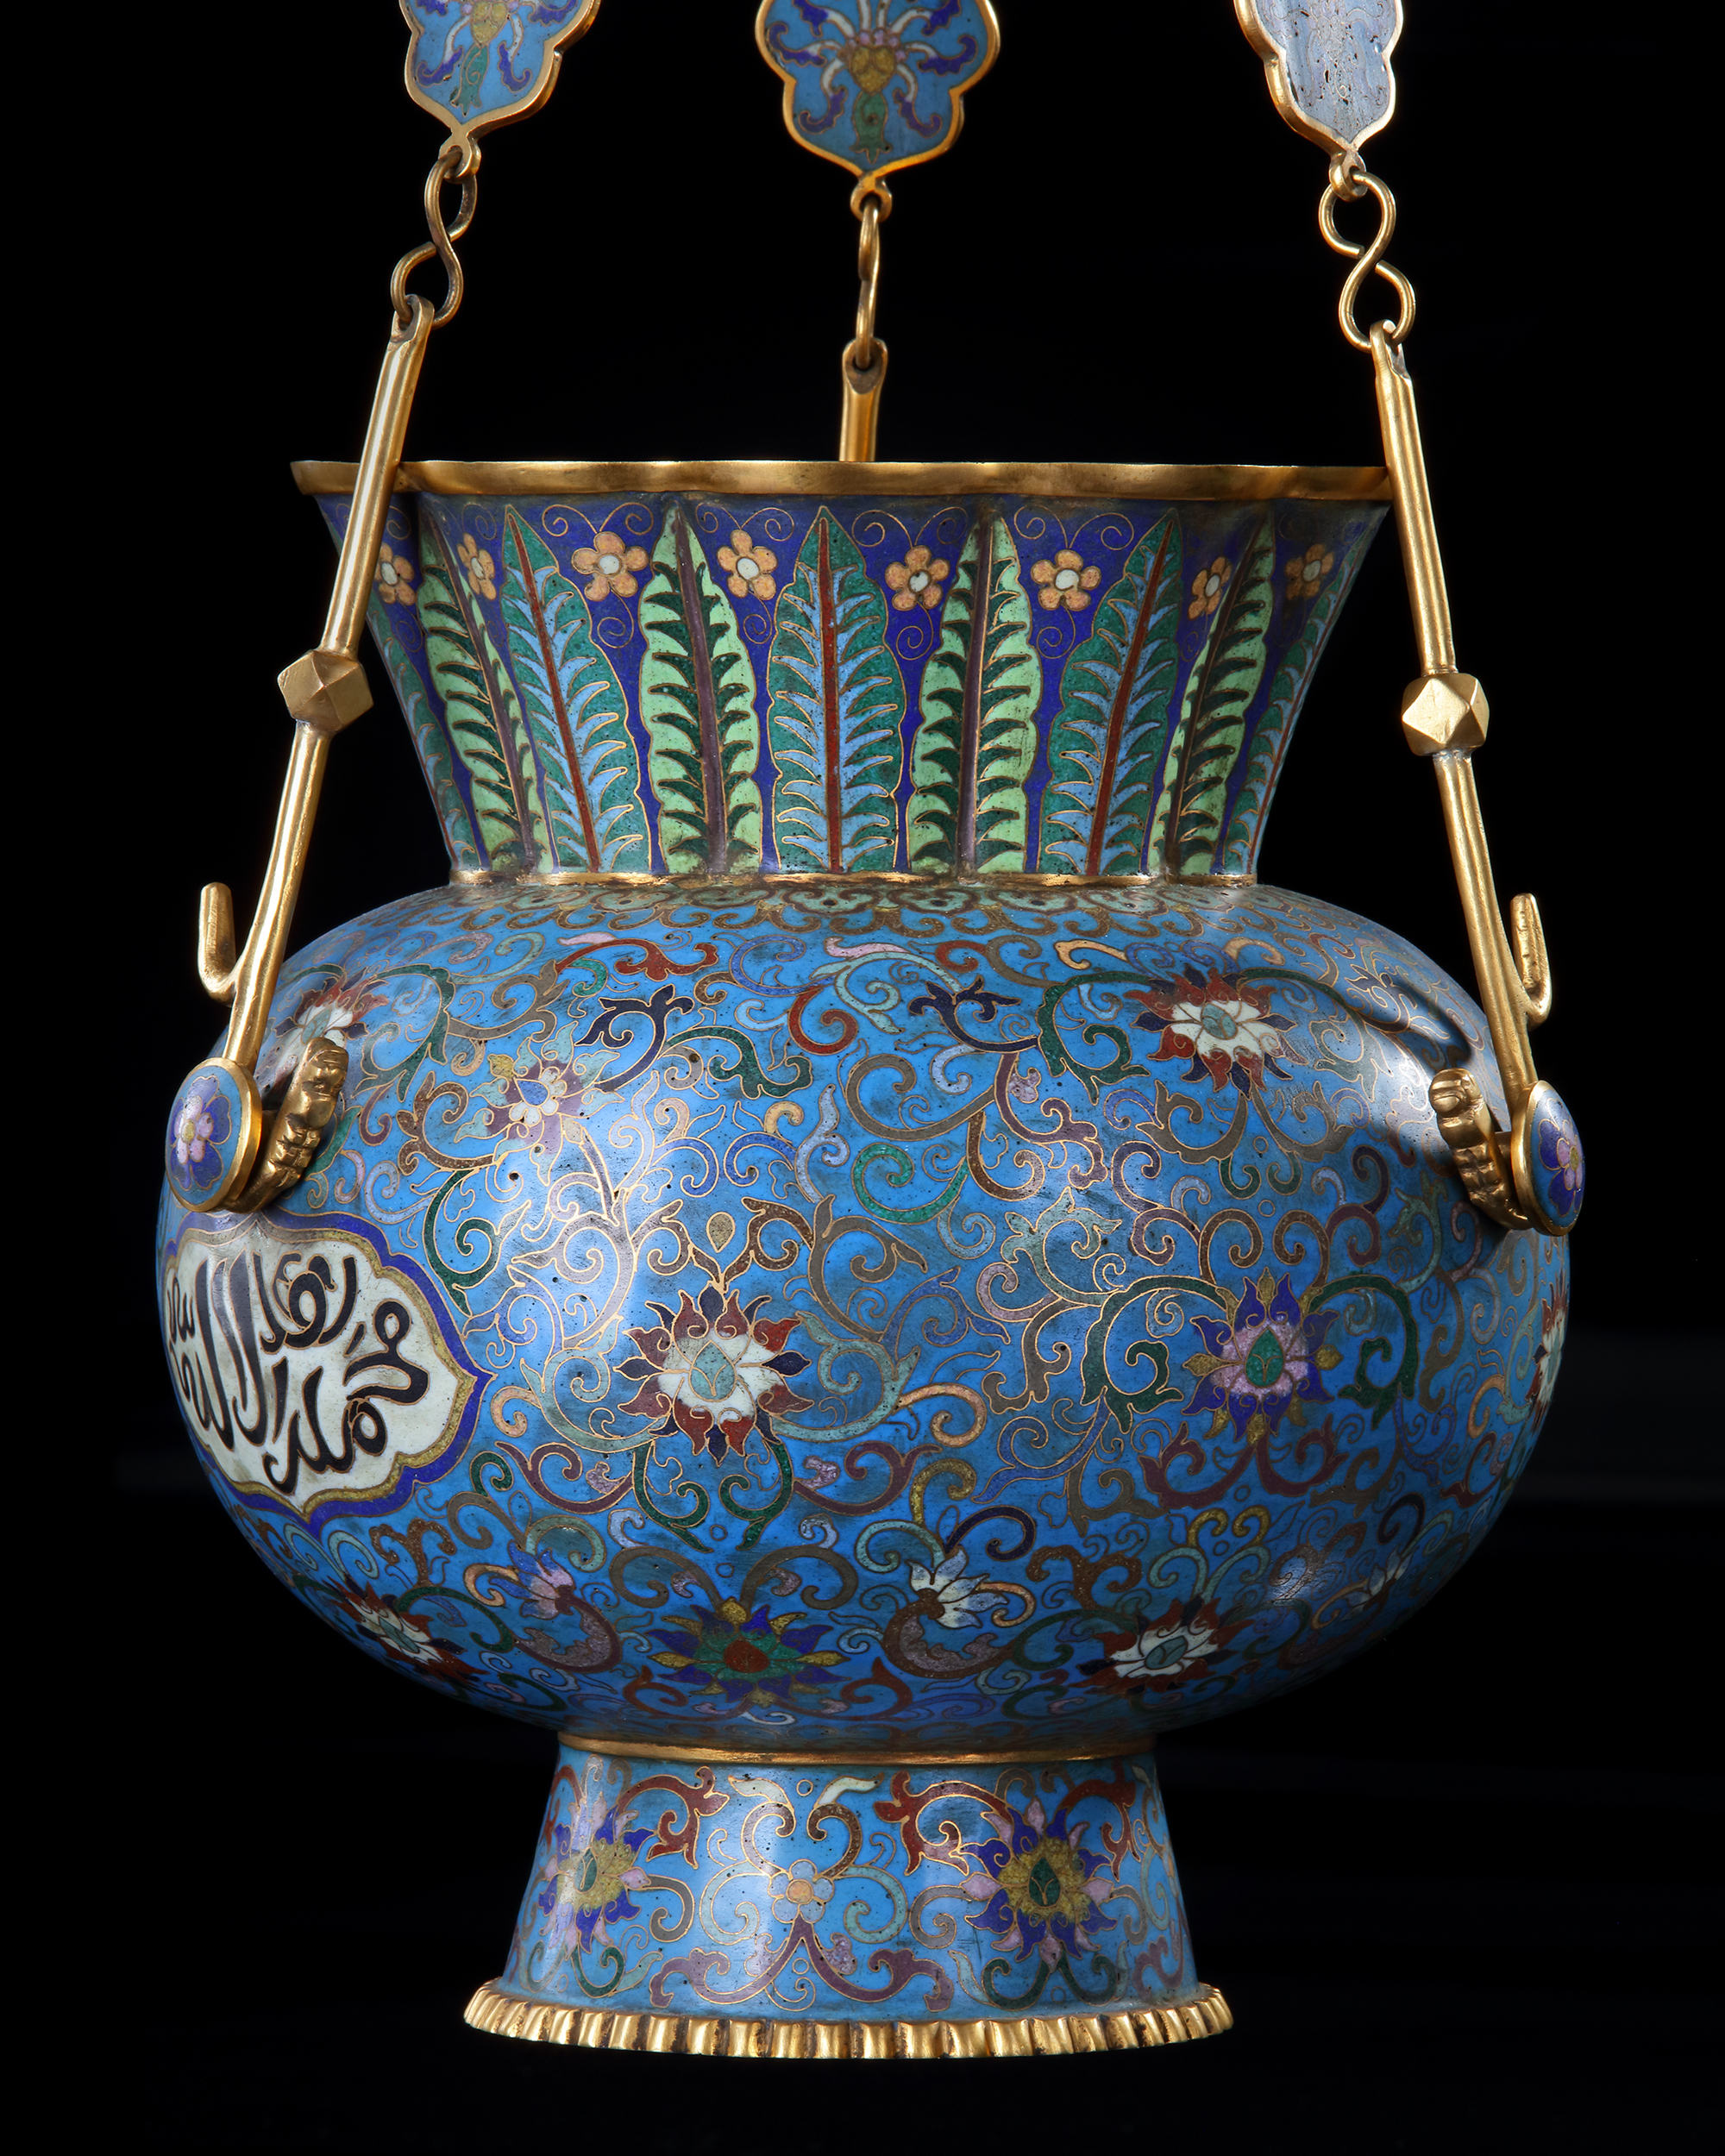 A CHINESE CLOISONNÉ MOSQUE LAMP FOR THE ISLAMIC MARKET, LATE 19TH CENTURY - Image 8 of 10